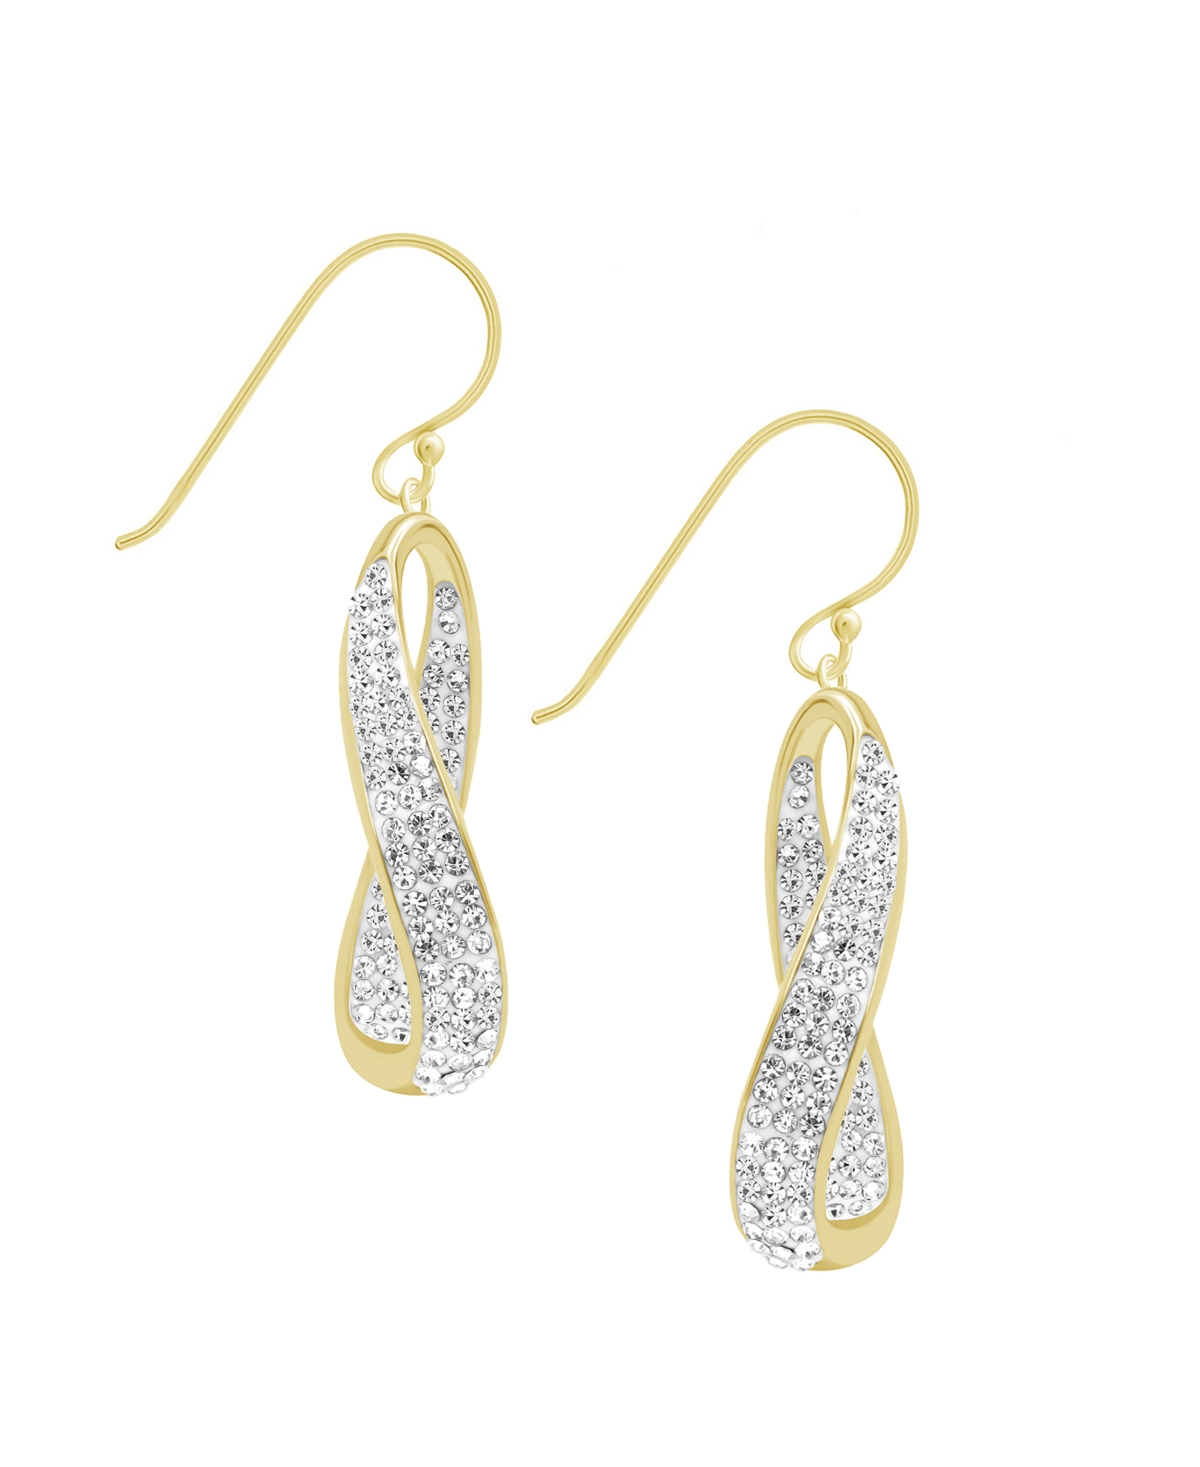 Clear Crystal Twist Drop Earrings in Gold Plate or Silver Plate - Gold